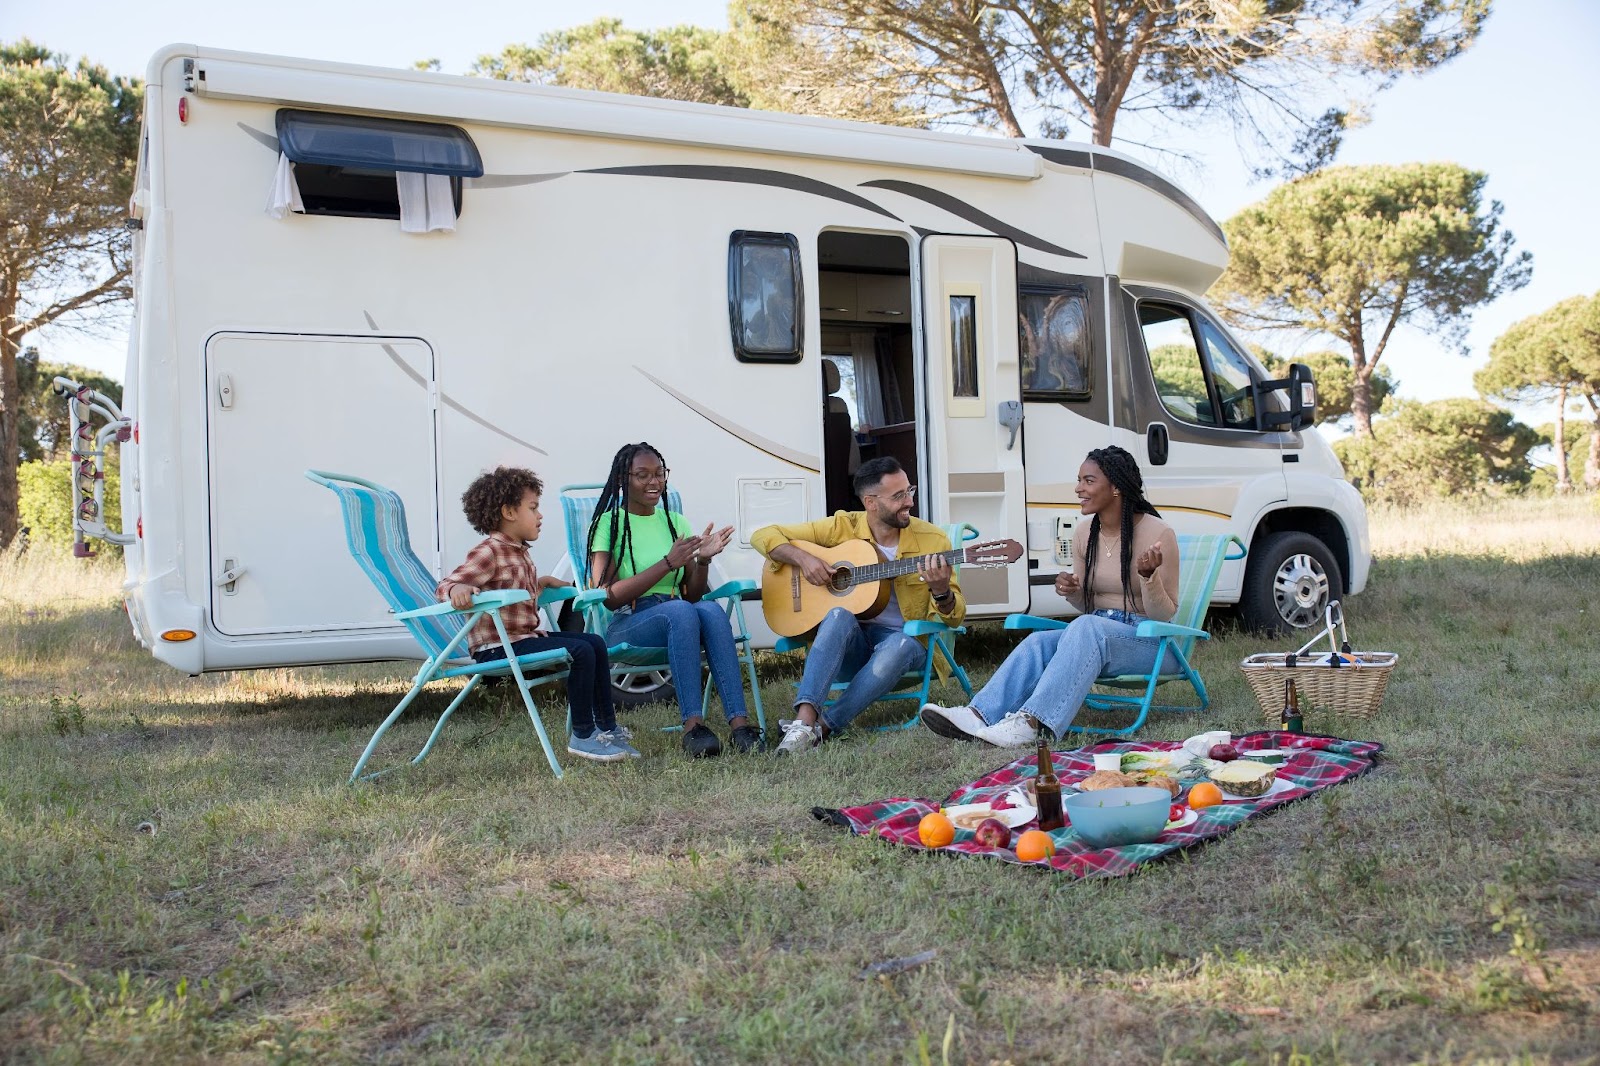 The Best Time to Sell Your RV: 5 Factors to Consider